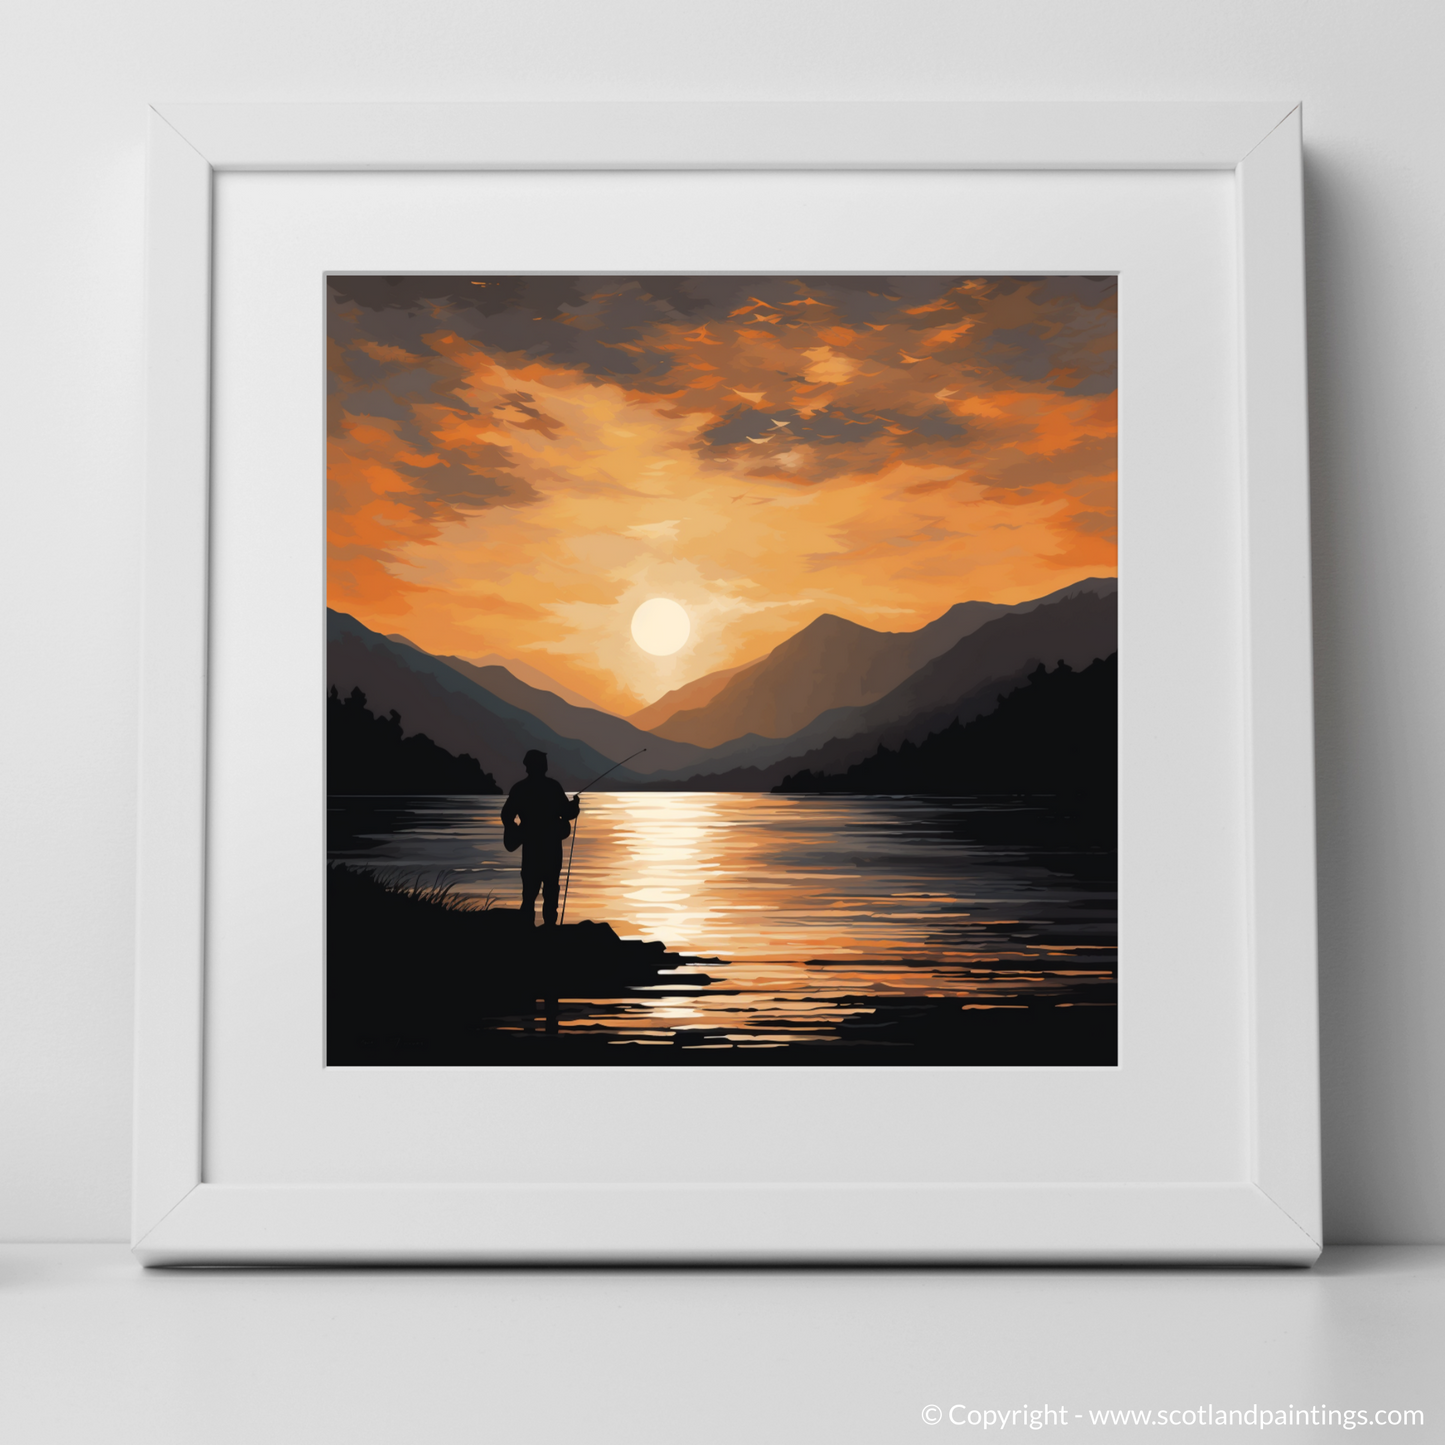 Art Print of Silhouetted fisherman on Loch Lomond with a white frame